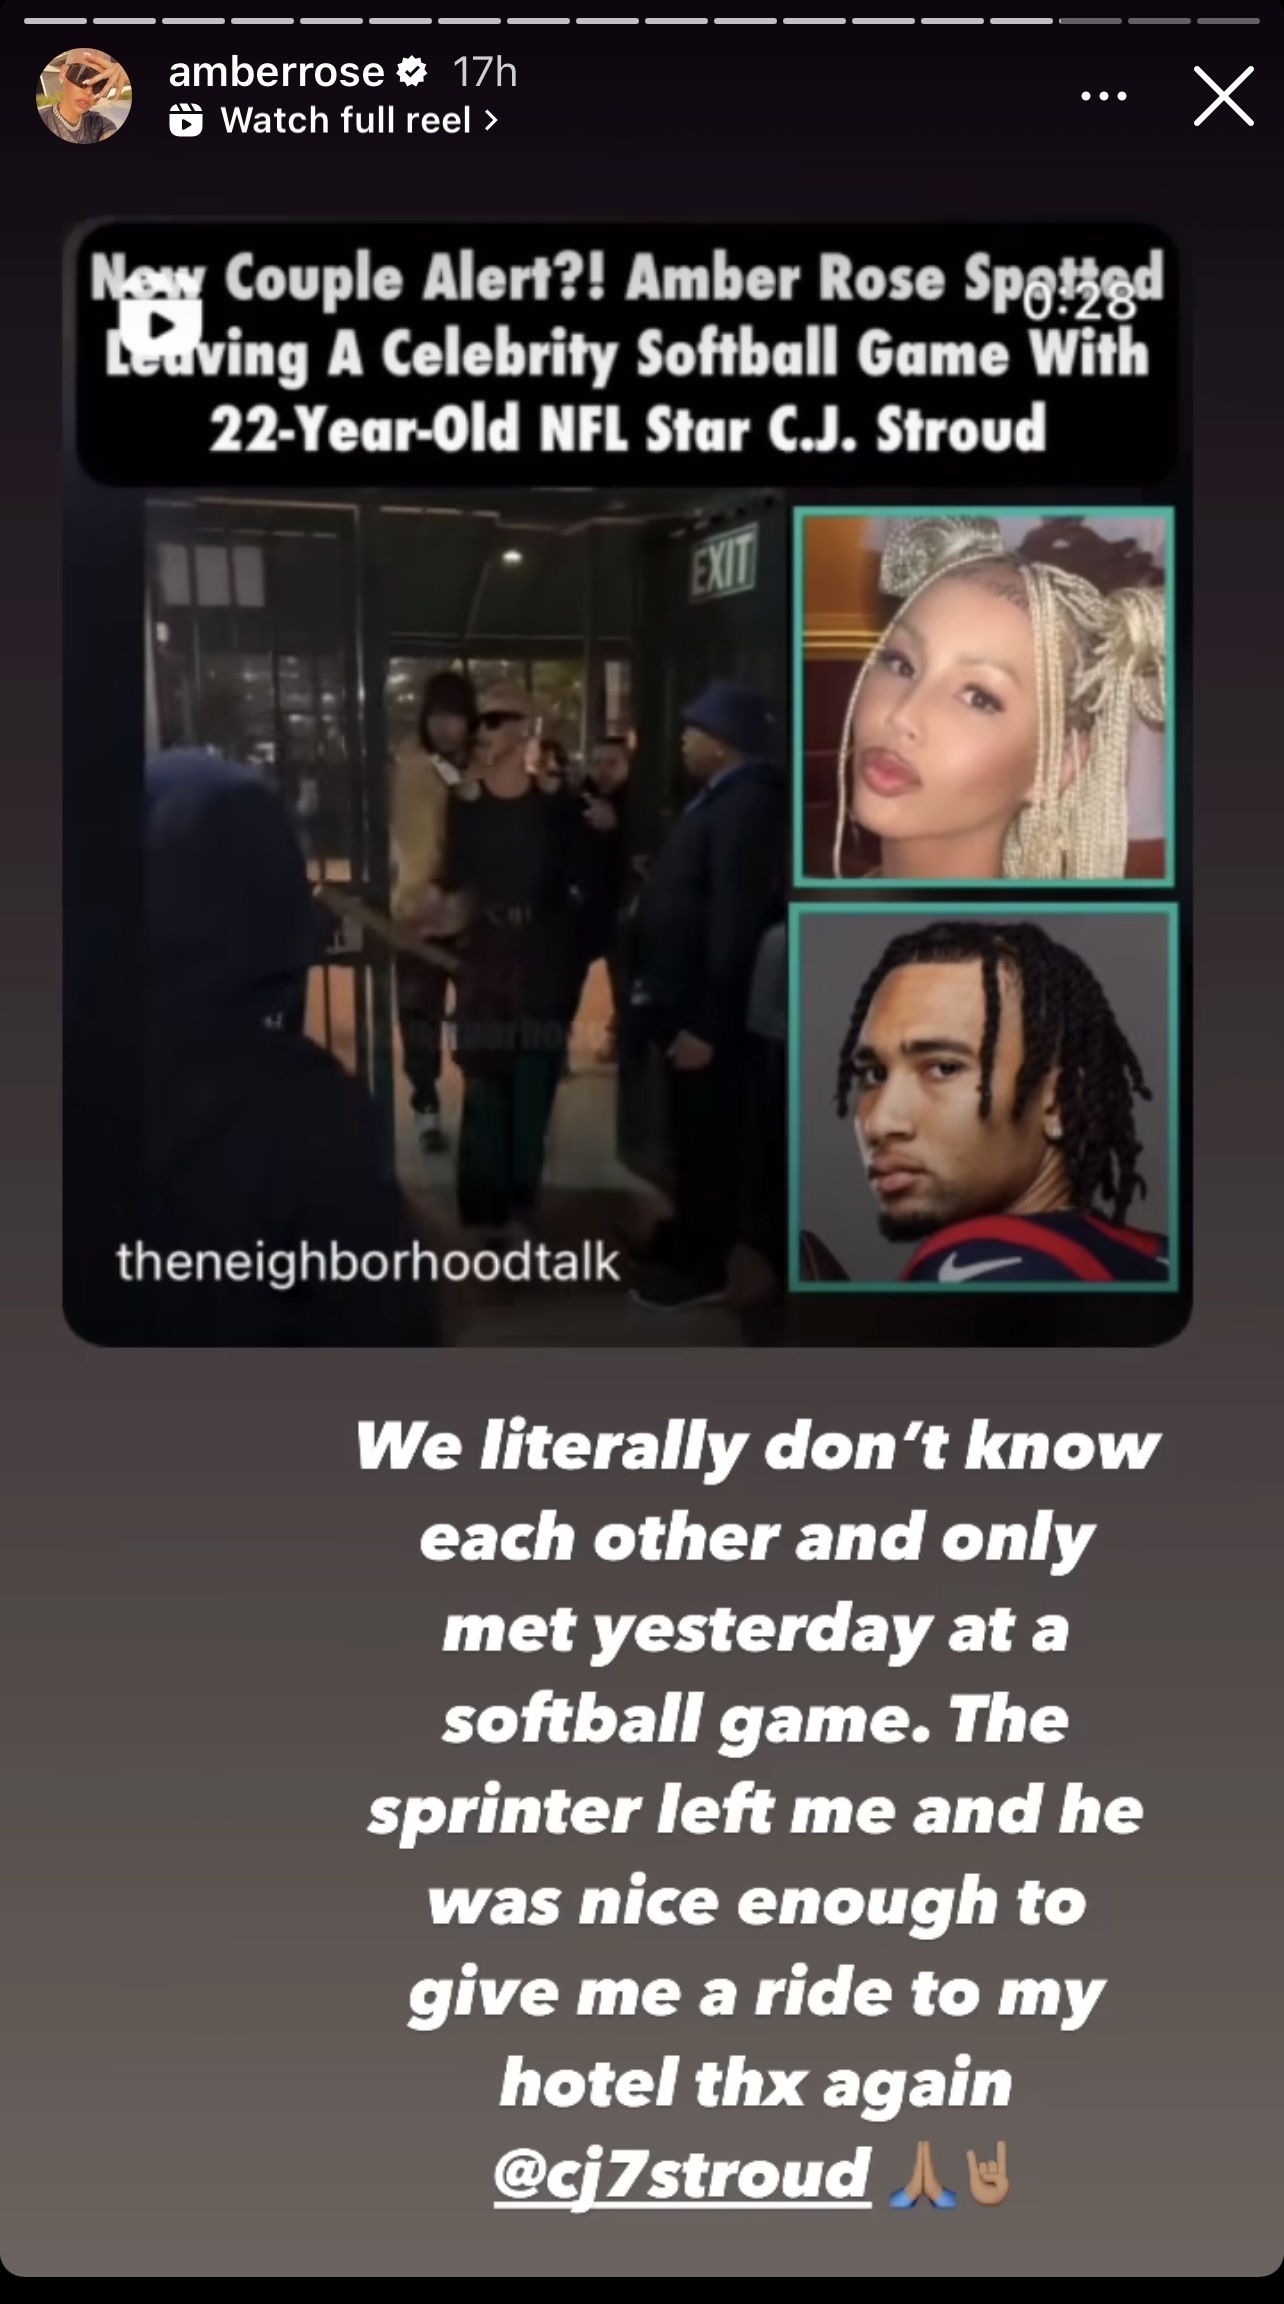 Amber Rose&#x27;s Instagram story showing her and NFL player C.J. Stroud, with text overlay sharing a brief encounter story